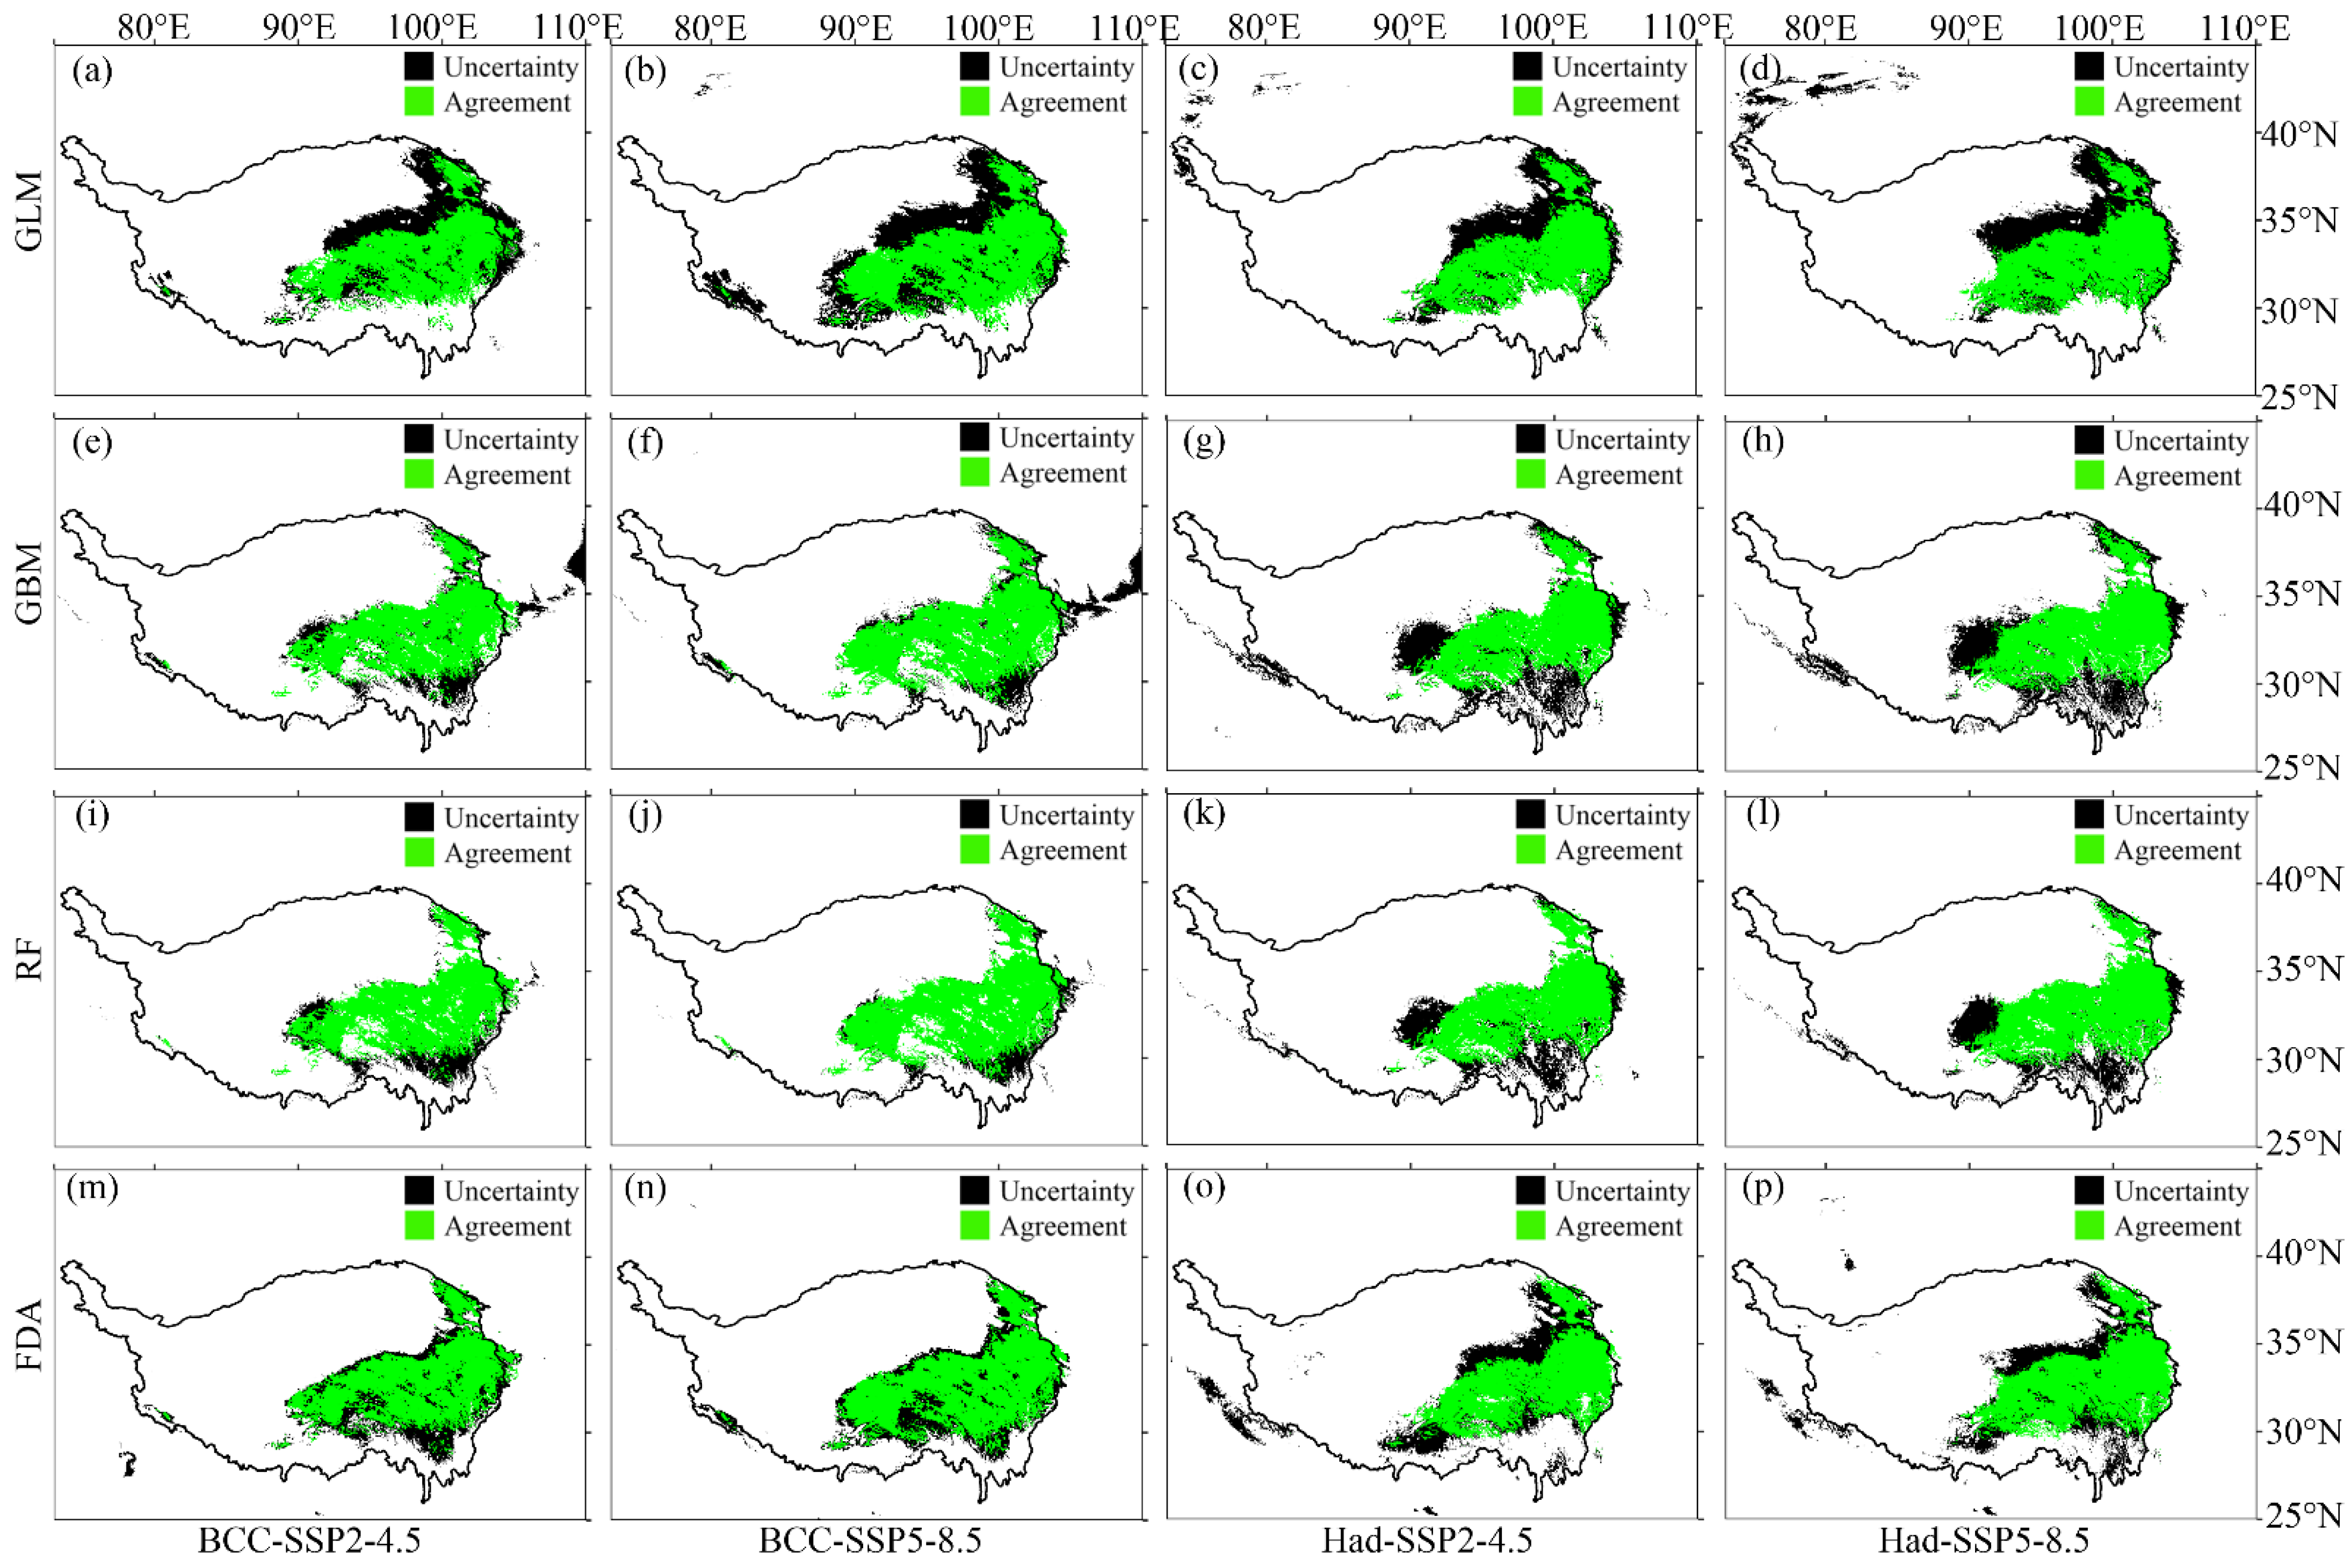 Predicting the Uncertain Future of Tropical Forest Species in a